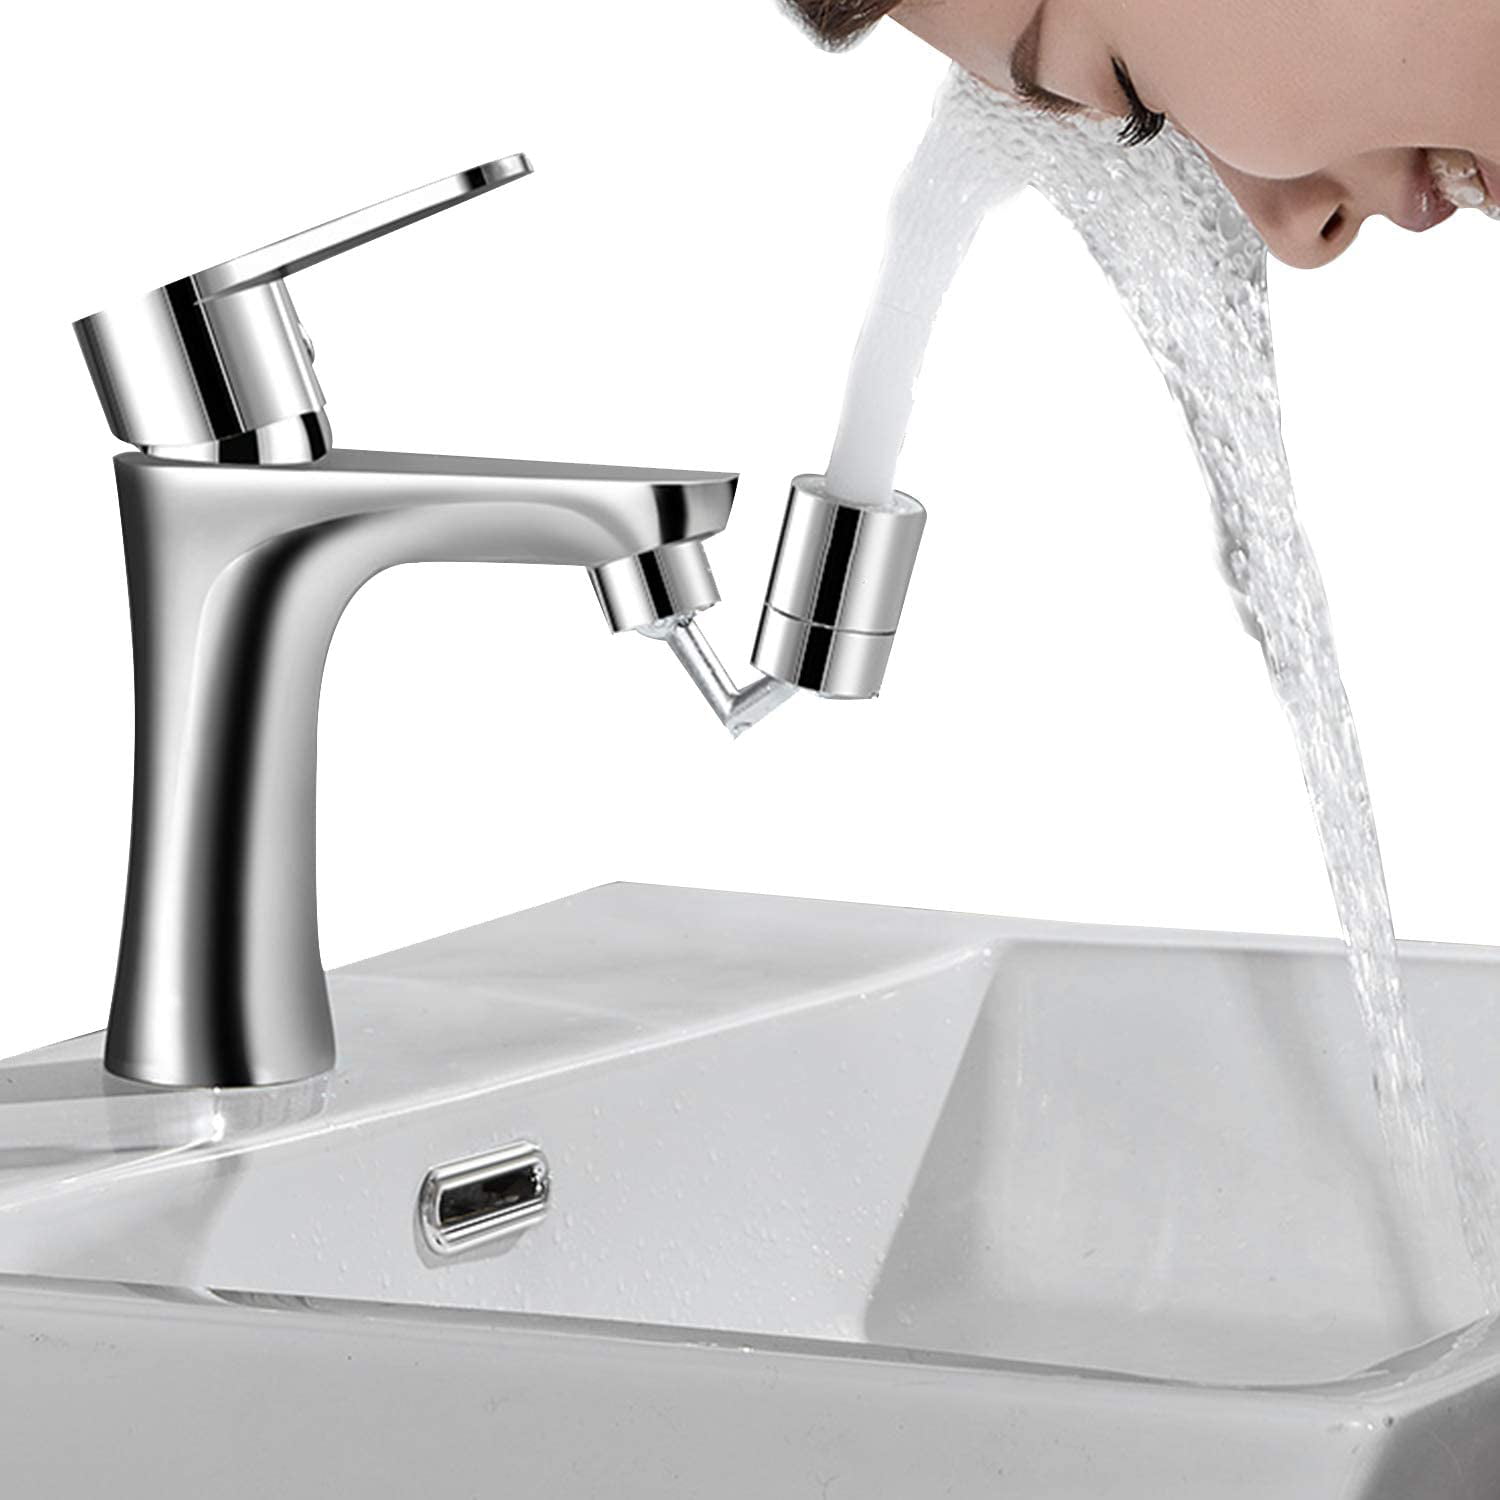 for Kitchen and Bathroom Sprayer Rotatable Bubbler YINGY 720° Rotating Sink Faucet Aerator Dual-function Kitchen Faucet Aerator Large Angle and Large Flow Aerator Faucet Aerator